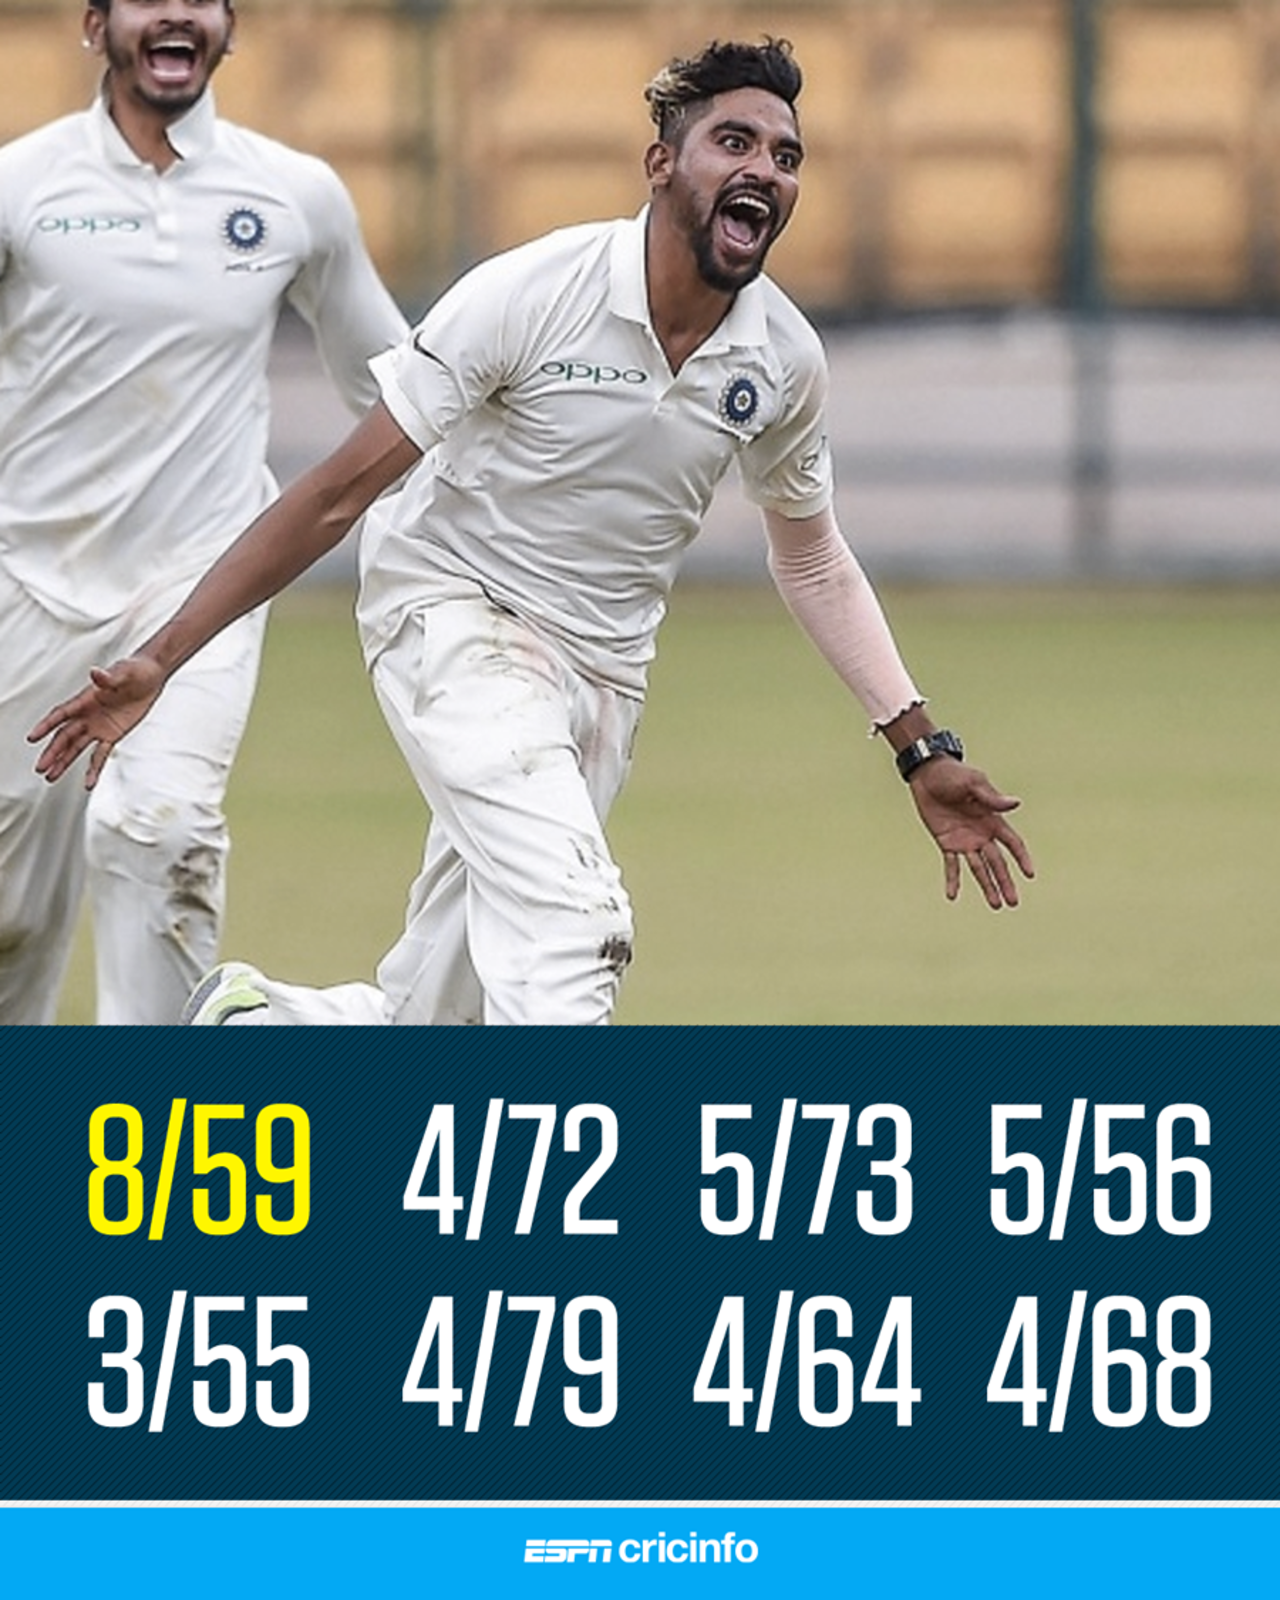 Beast mode on: Mohammed Siraj now has 37 wickets at 14.21 in his last 8 first-class innings